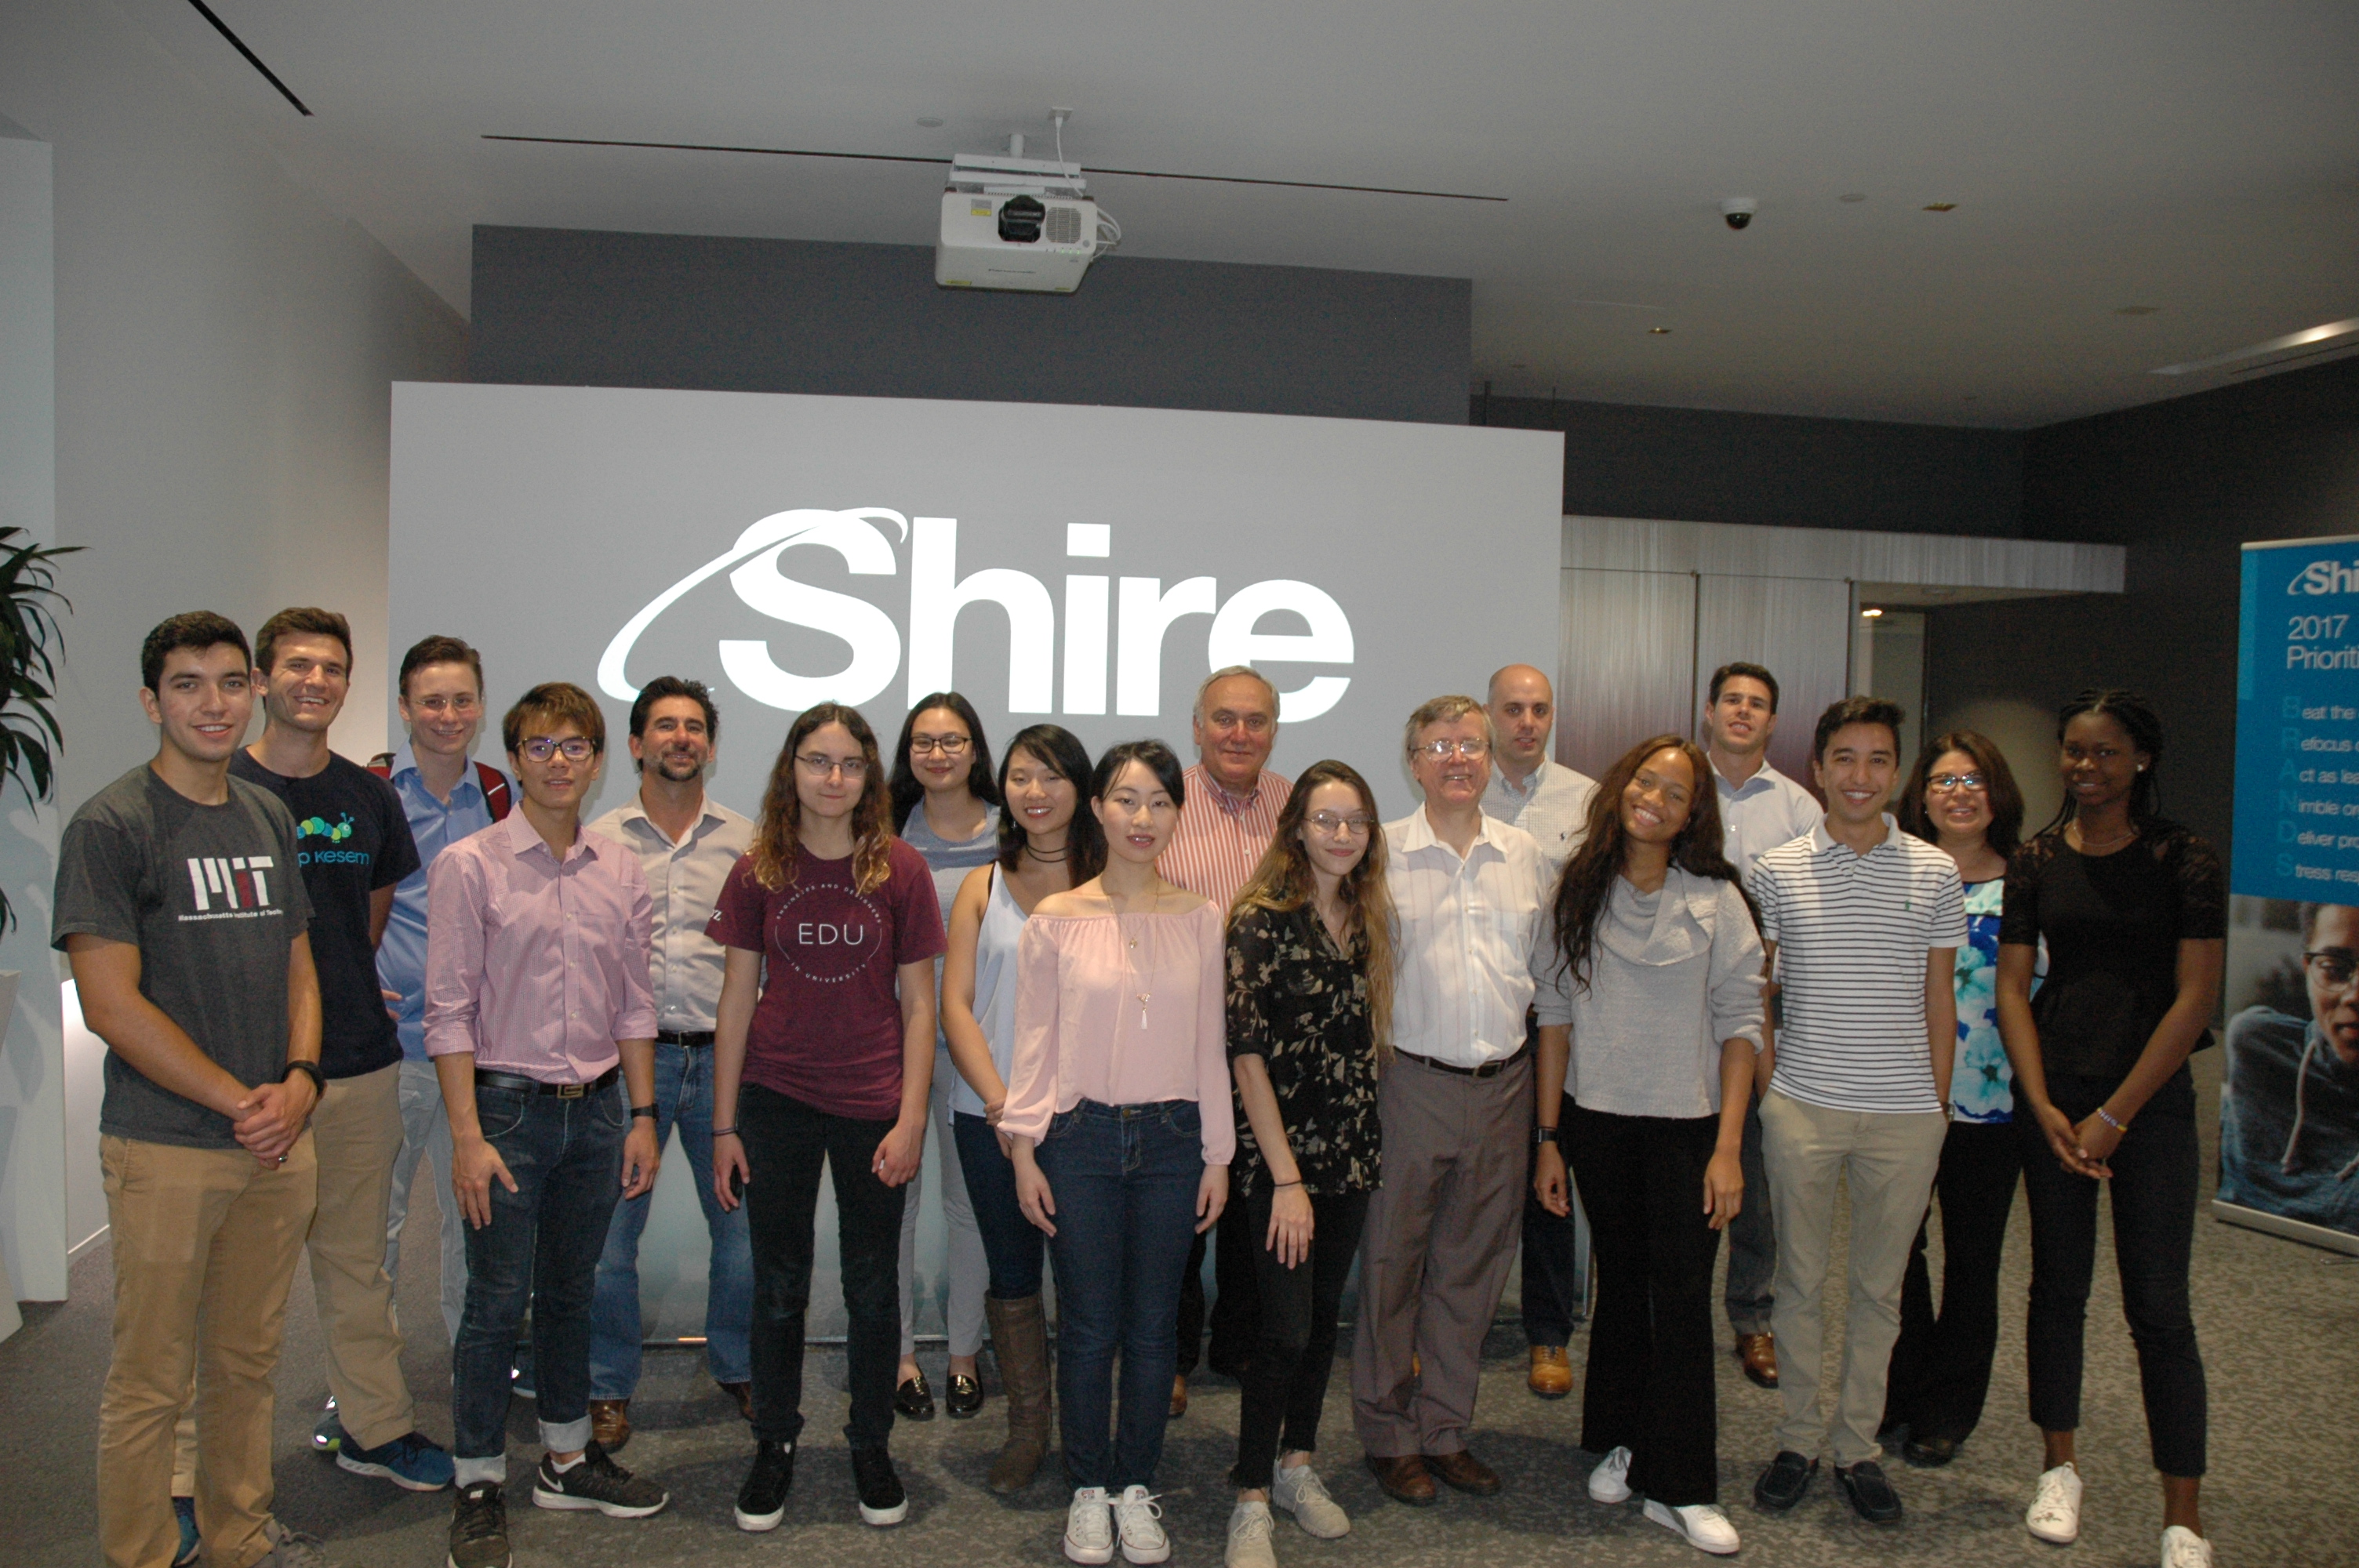 Students from the 10.28 class and speakers from Shire stand in front of the Shire logo.